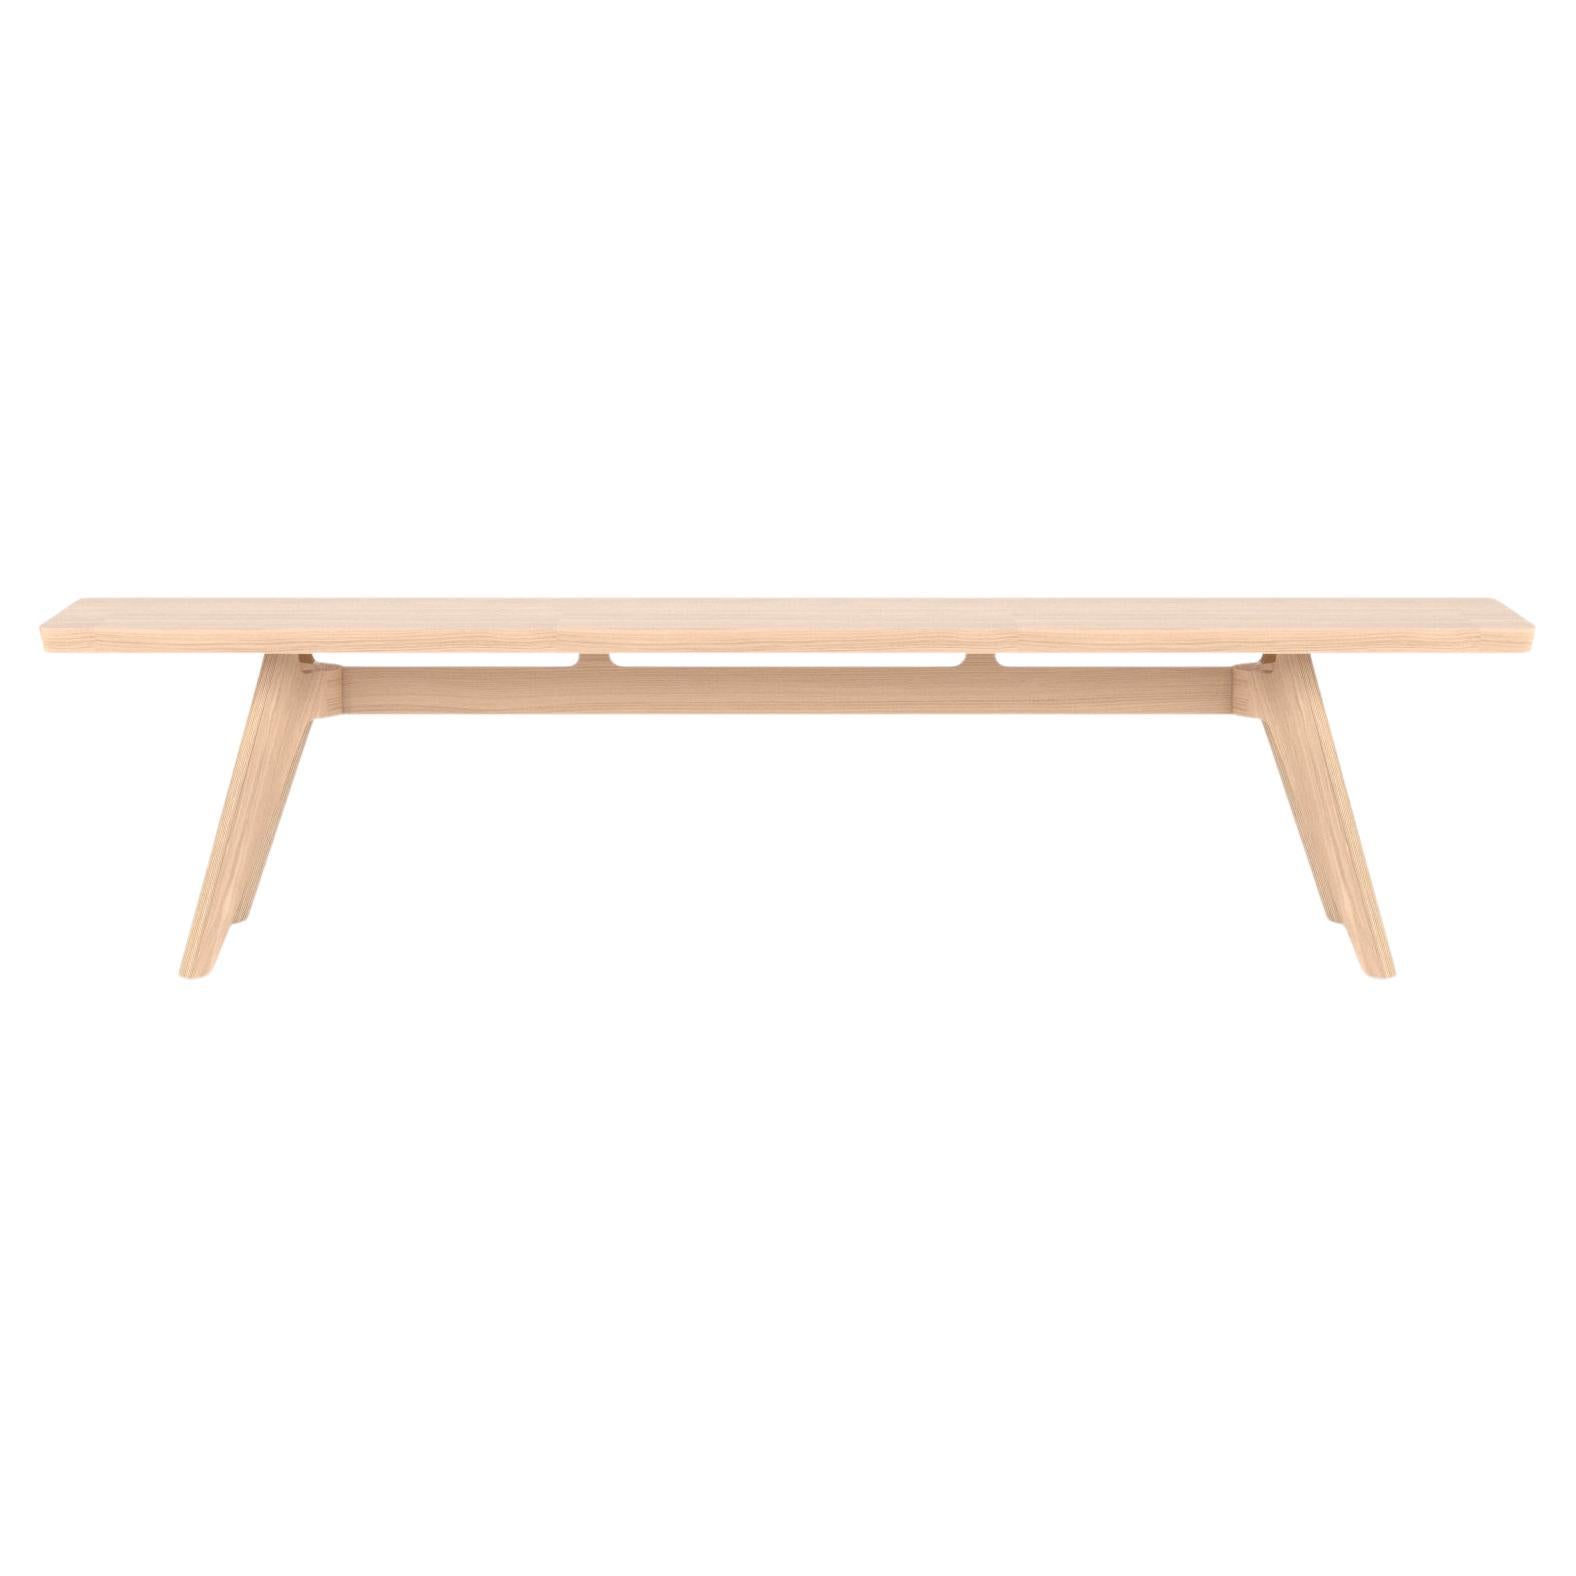 LAVITTA Bench 220 cm by Timo Mikkonen & Antti x Poiat 
Lavitta Collection 2016

Available dimensions: 
- H.42 x 170 x 32 cm 
- H.42 x 220 x 32 cm 

Wood finishes : Oak or Dark oak

Model shown: 
- H.42 x 220 x 32 cm
- Oak

The Lavitta Bench is a